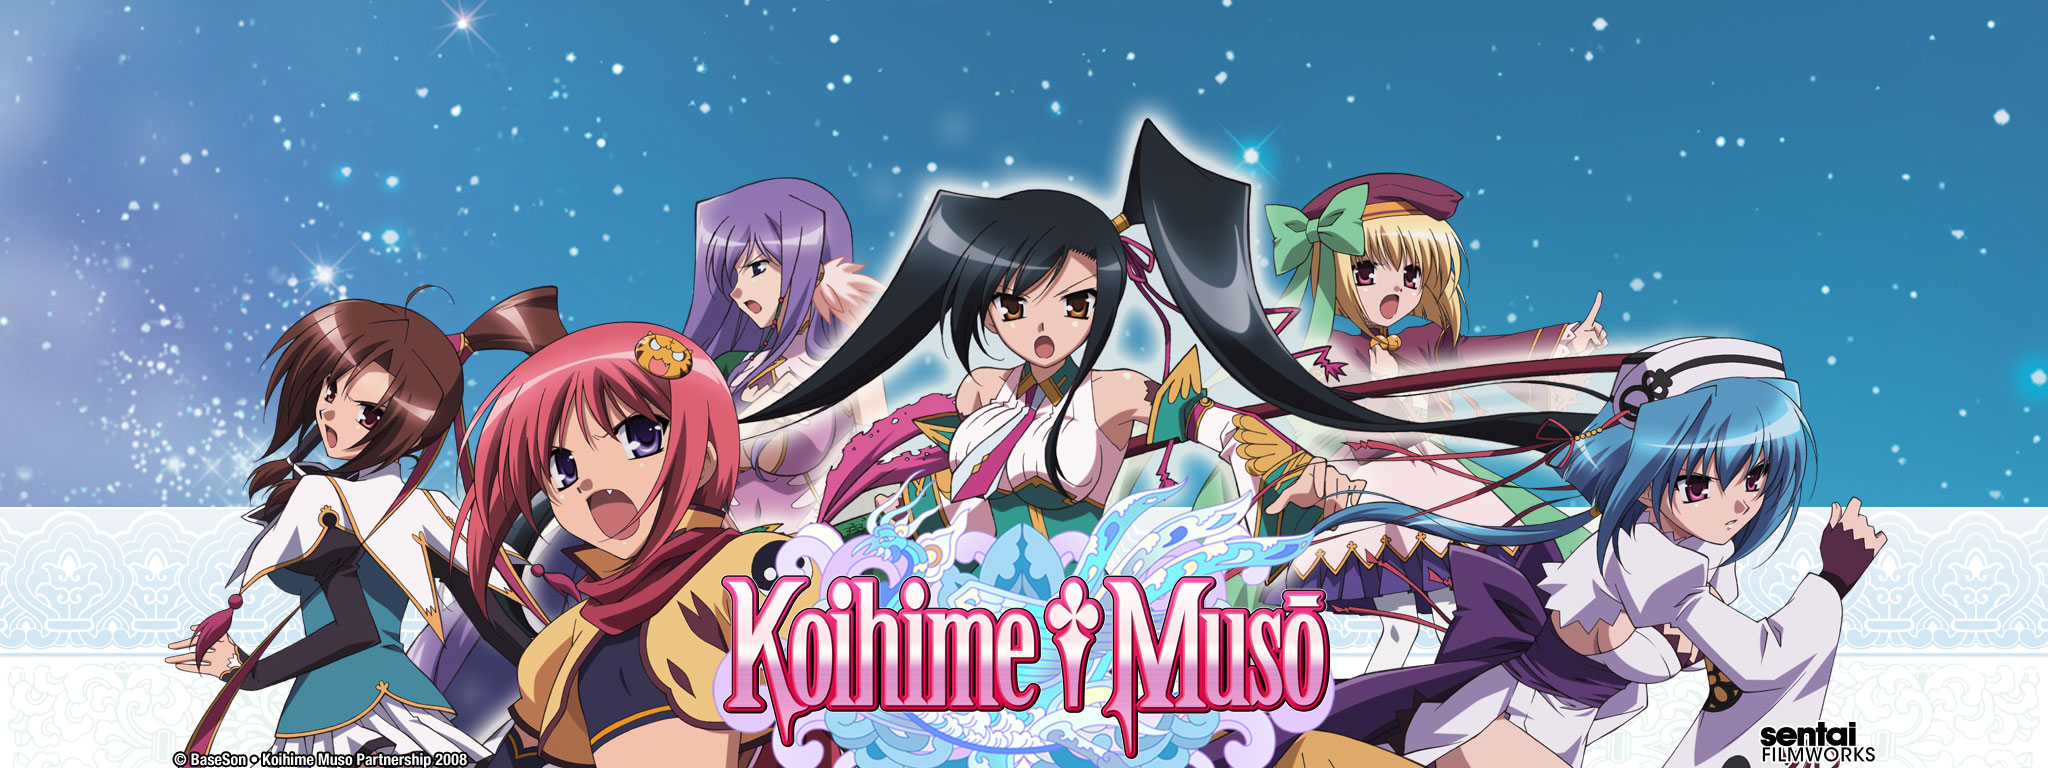 Title Art for Koihime Muso